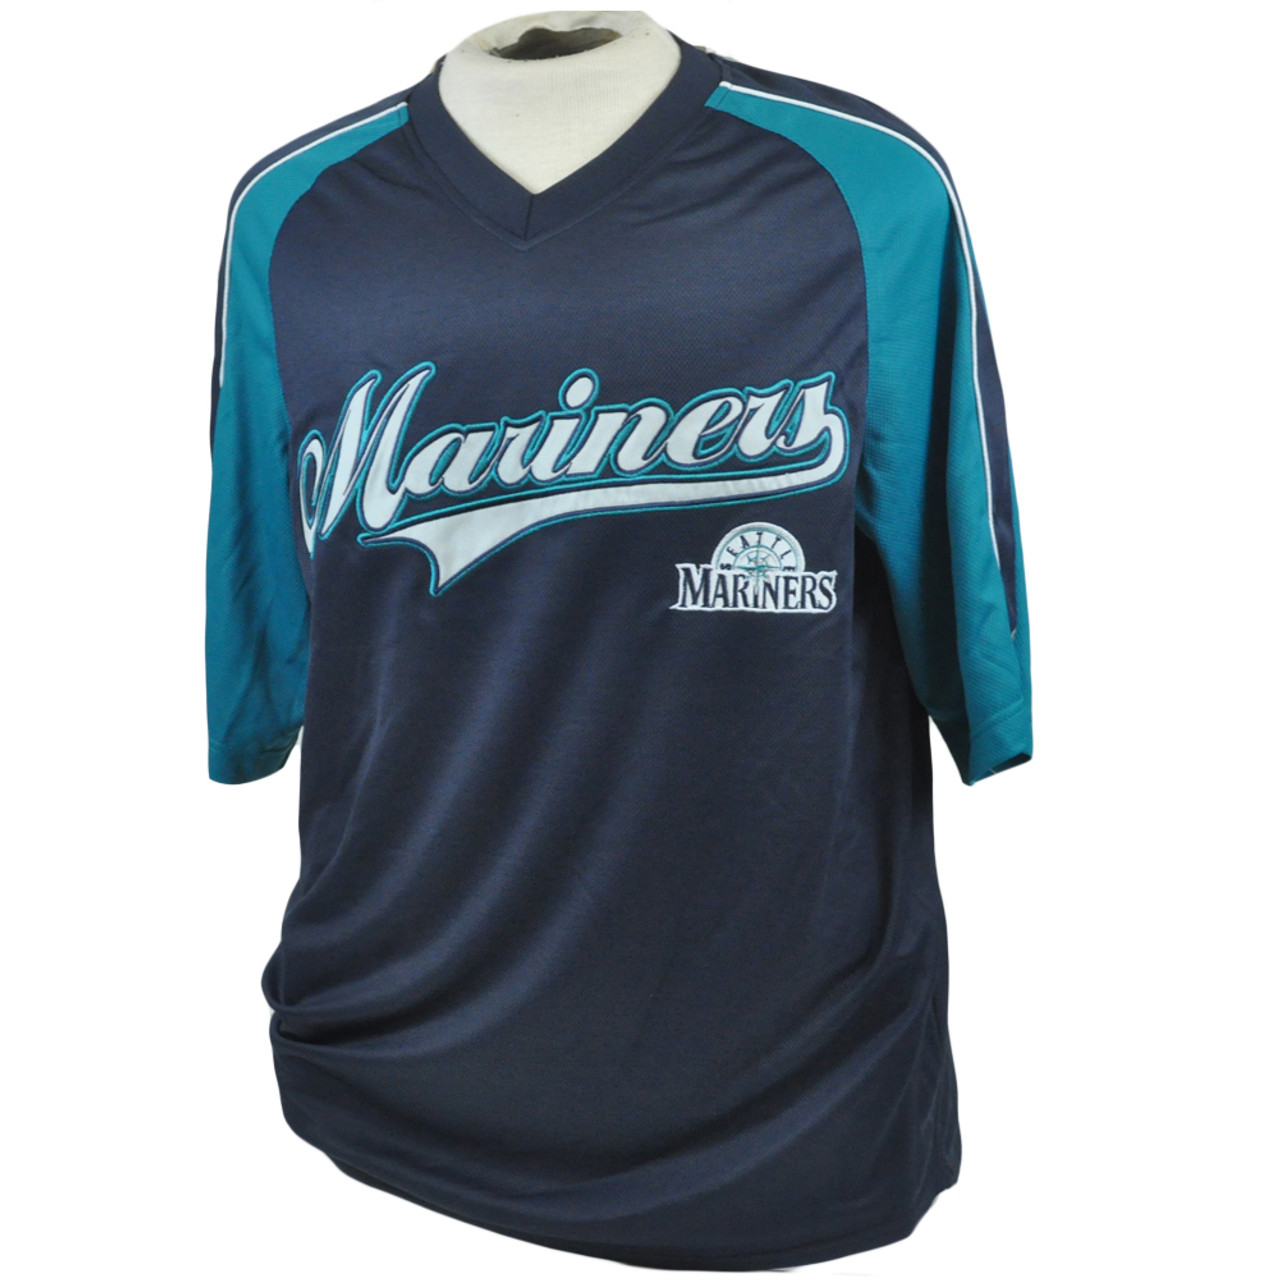 MLB Seattle Mariners True Fan Lightweight Licensed Authentic